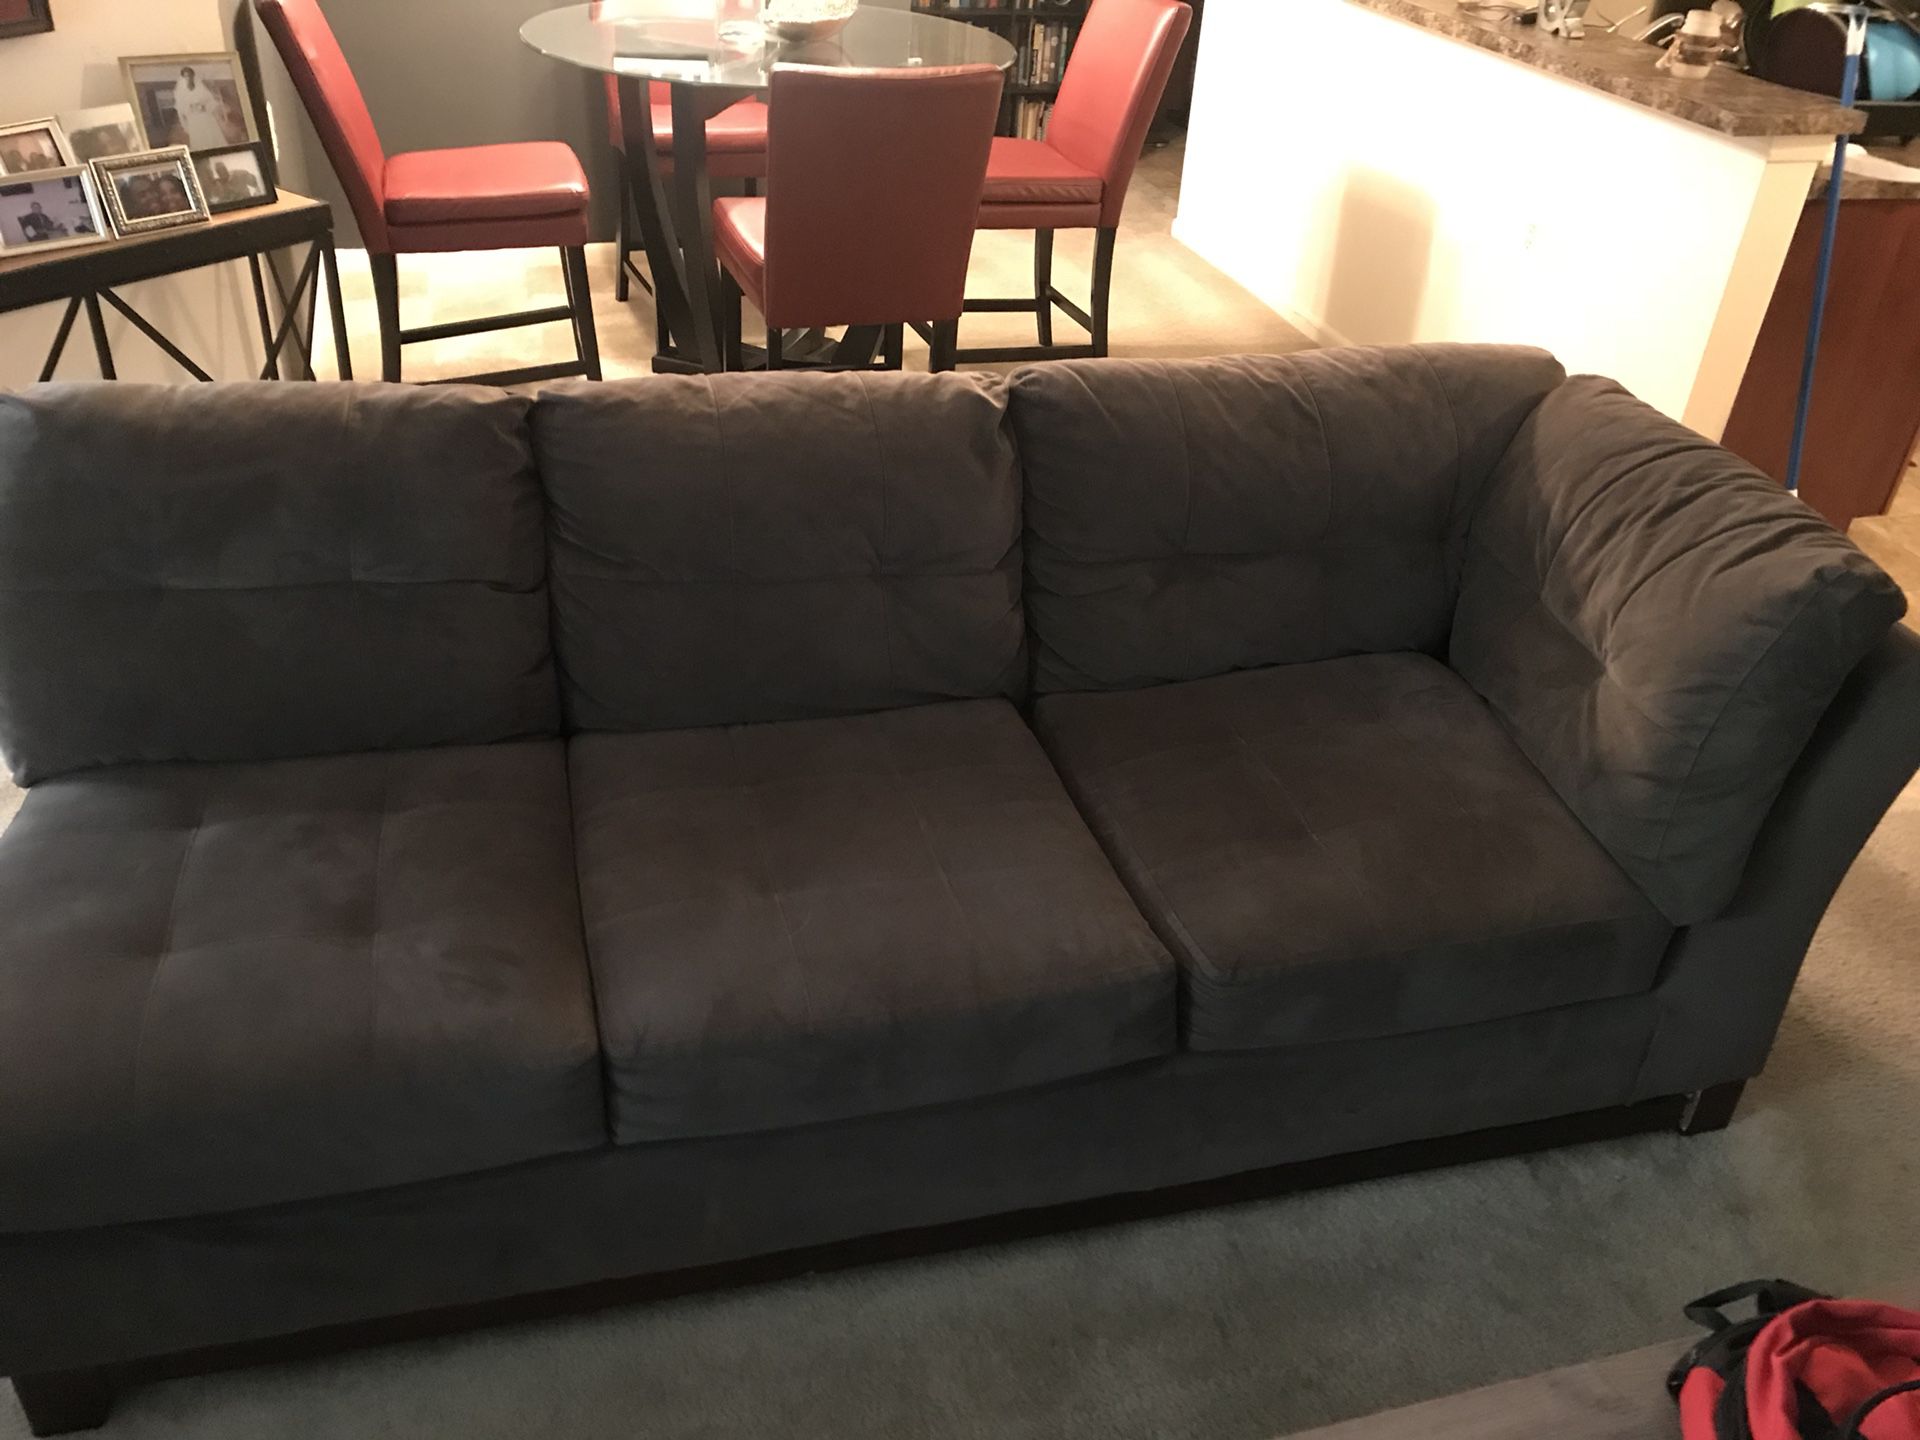 Long Grey micro suede sofa- smoke free home with 1 occupant